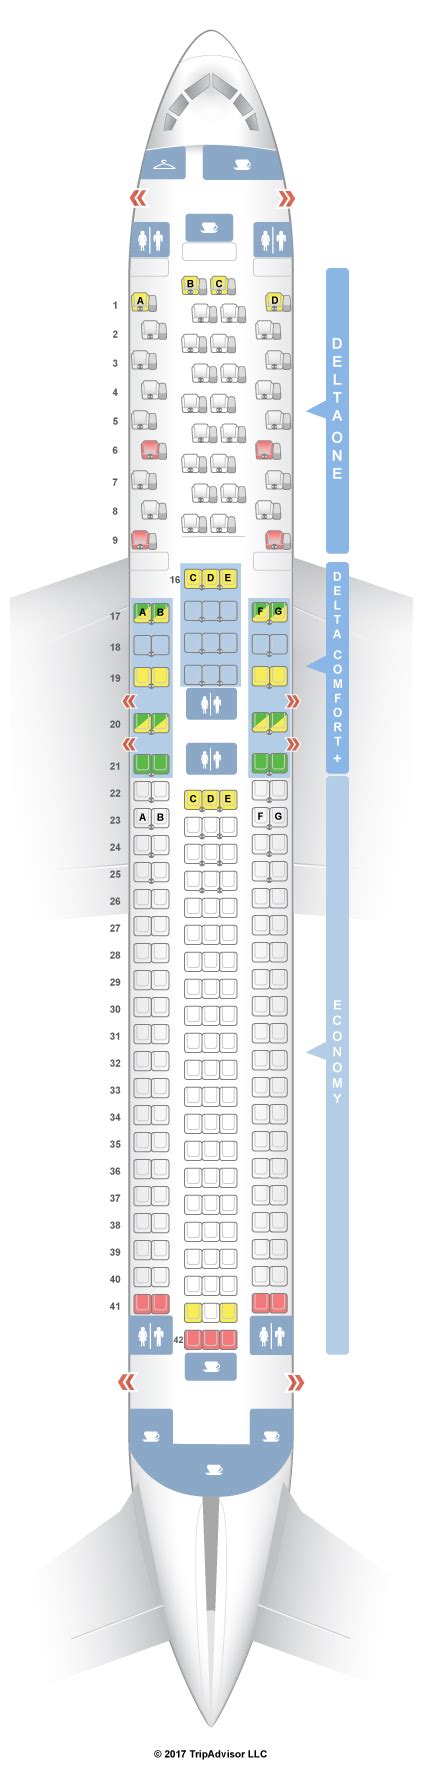 Delta boeing 767-300 seatguru. 2 days ago · Yakutia Airlines. Yamal Airlines. Yemenia. Yeti Airlines. Zagros Airlines. Zambia Airways. Zipair. Best seat maps for 700 airlines. Find most comfortable airplane seating charts for every major airline | SeatMaps. 